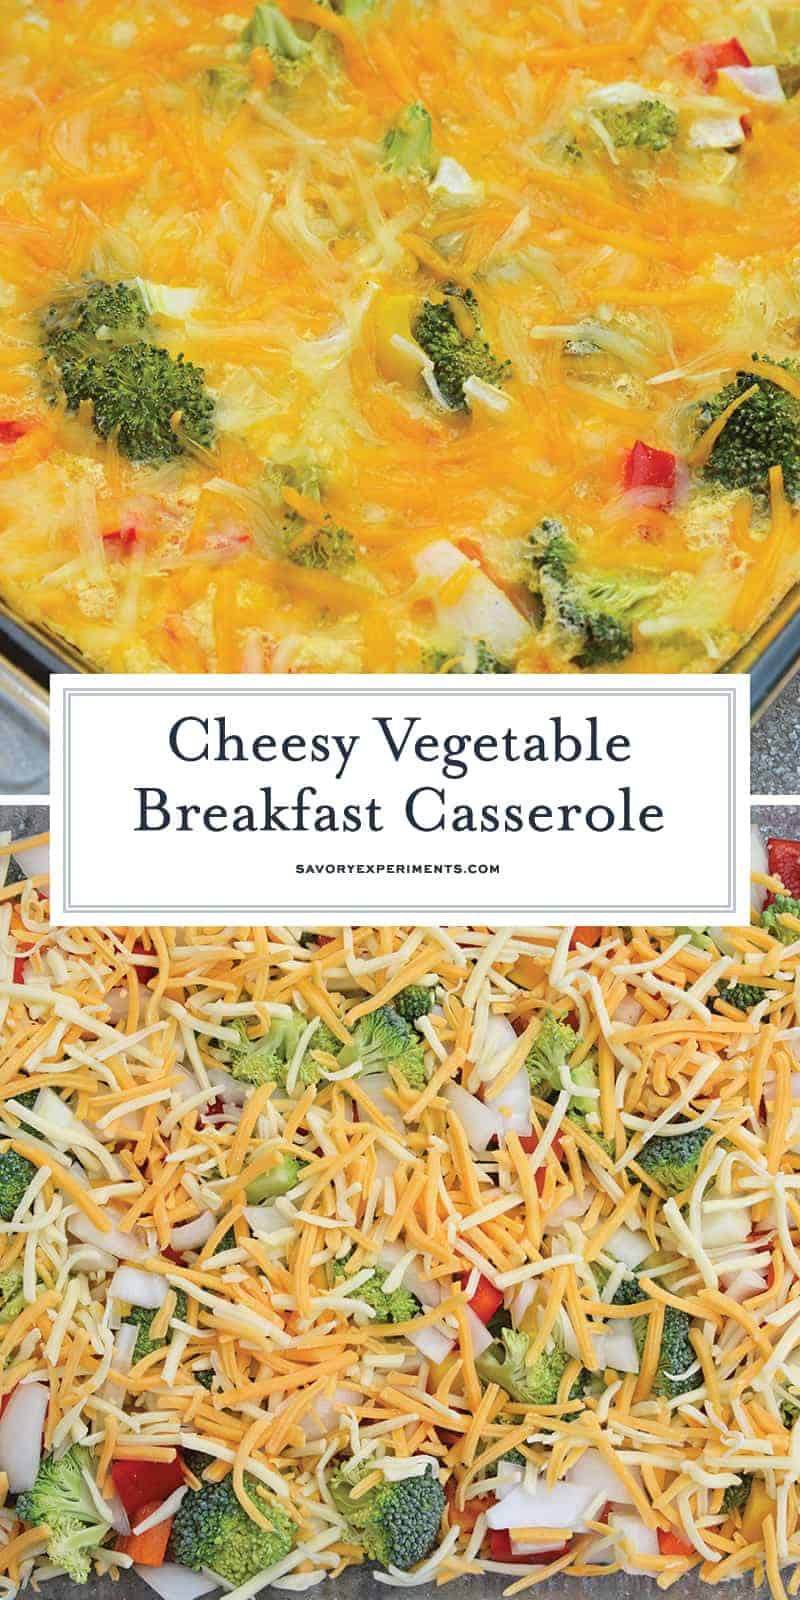 Cheesy Vegetable Breakfast Casserole uses fluffy eggs with broccoli, bell pepper, onion and cheese to make a delightful breakfast that is perfect for feeding a crowd! #vegetablecasserole #breakfastcasserole www.savoryexperiments.com 